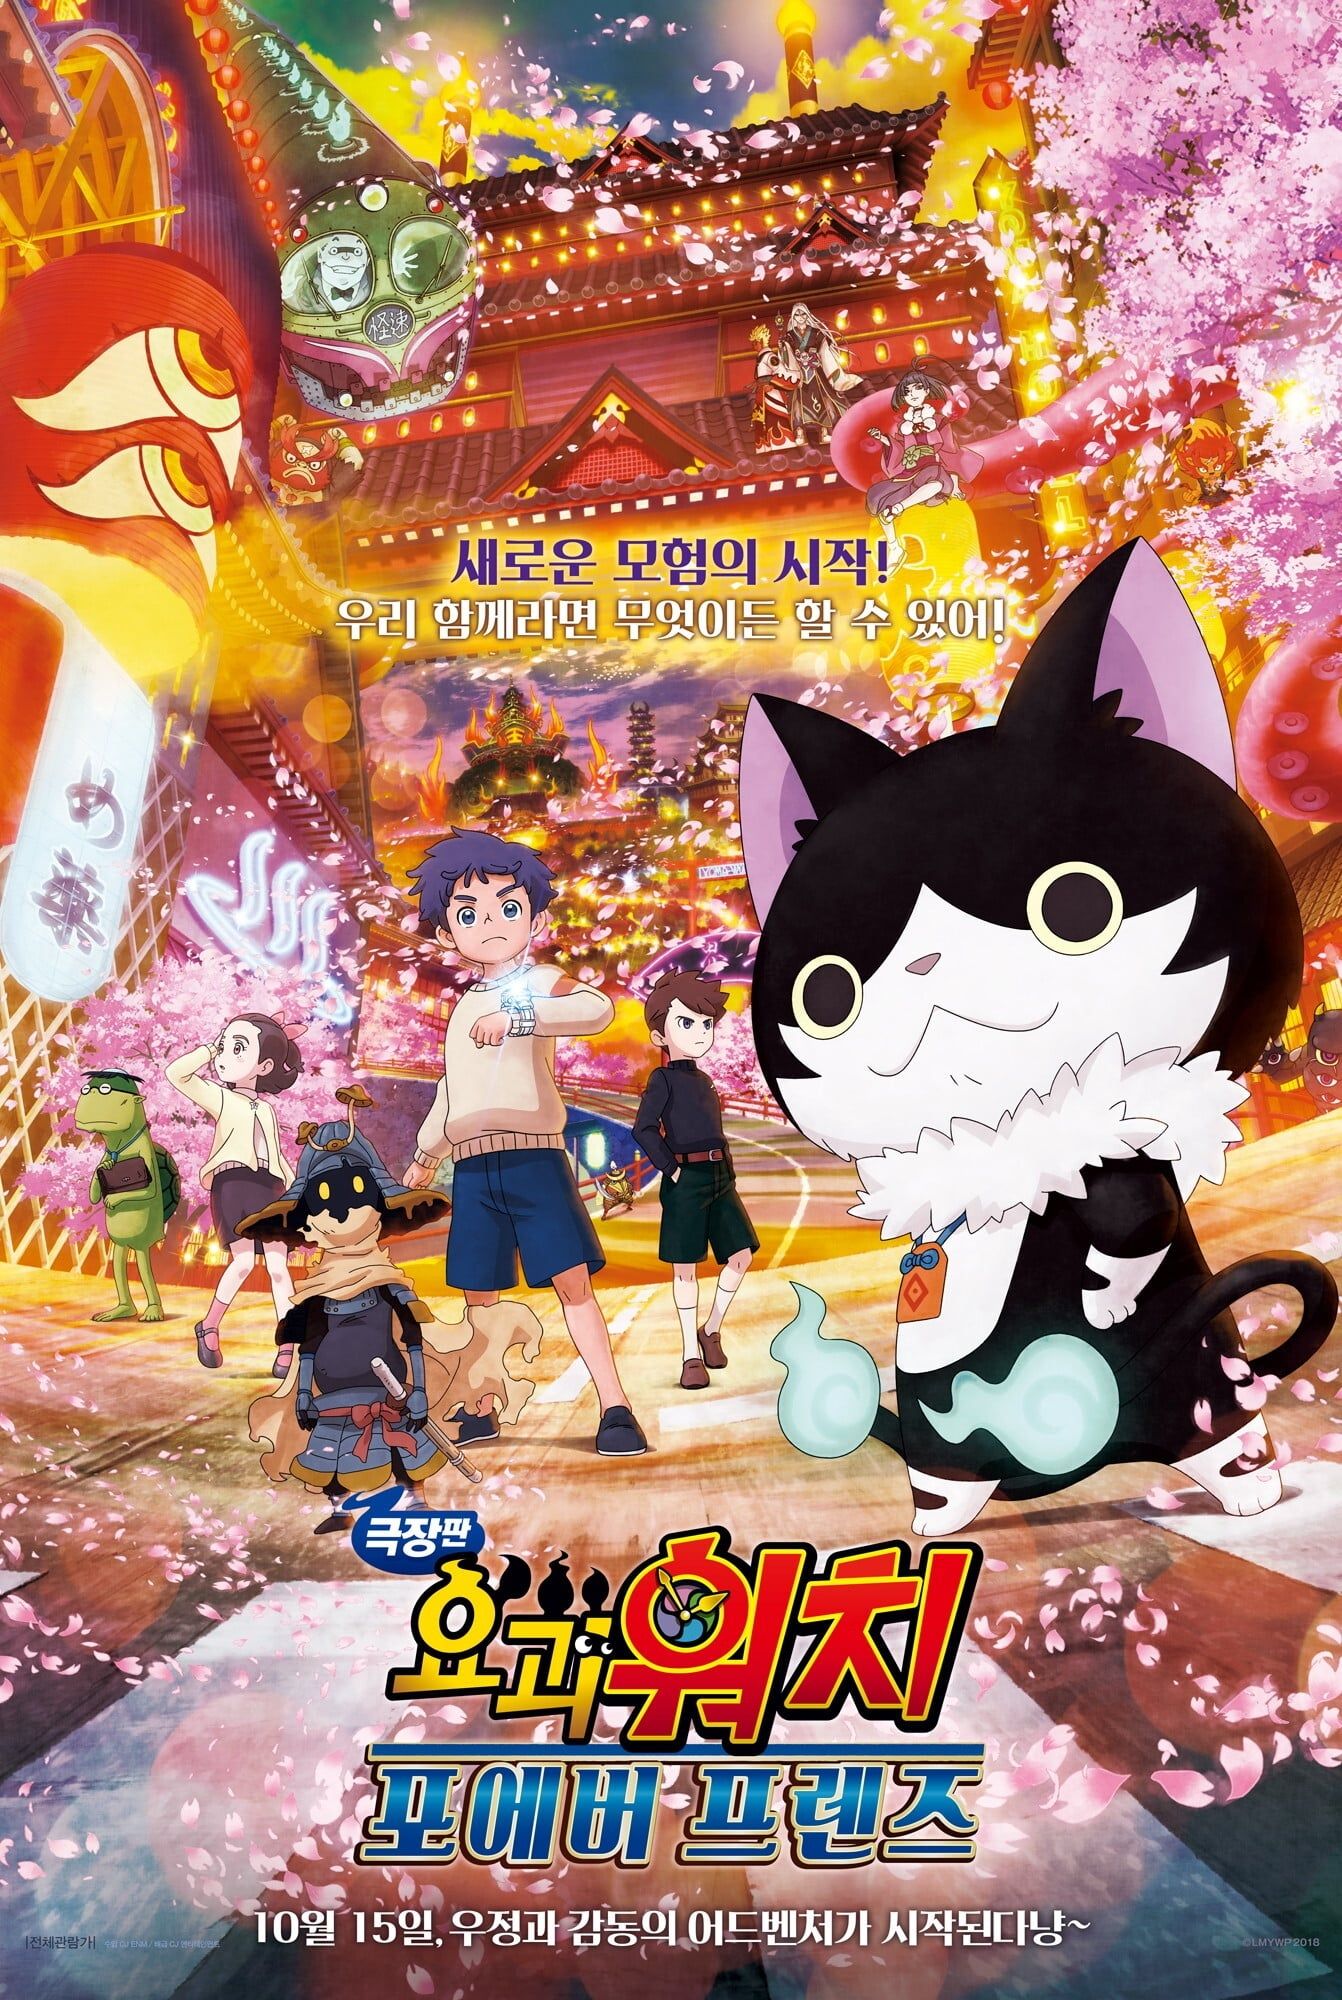 Youkai Watch Movie 5: Forever Friends (Movie) (Sub) Best Anime